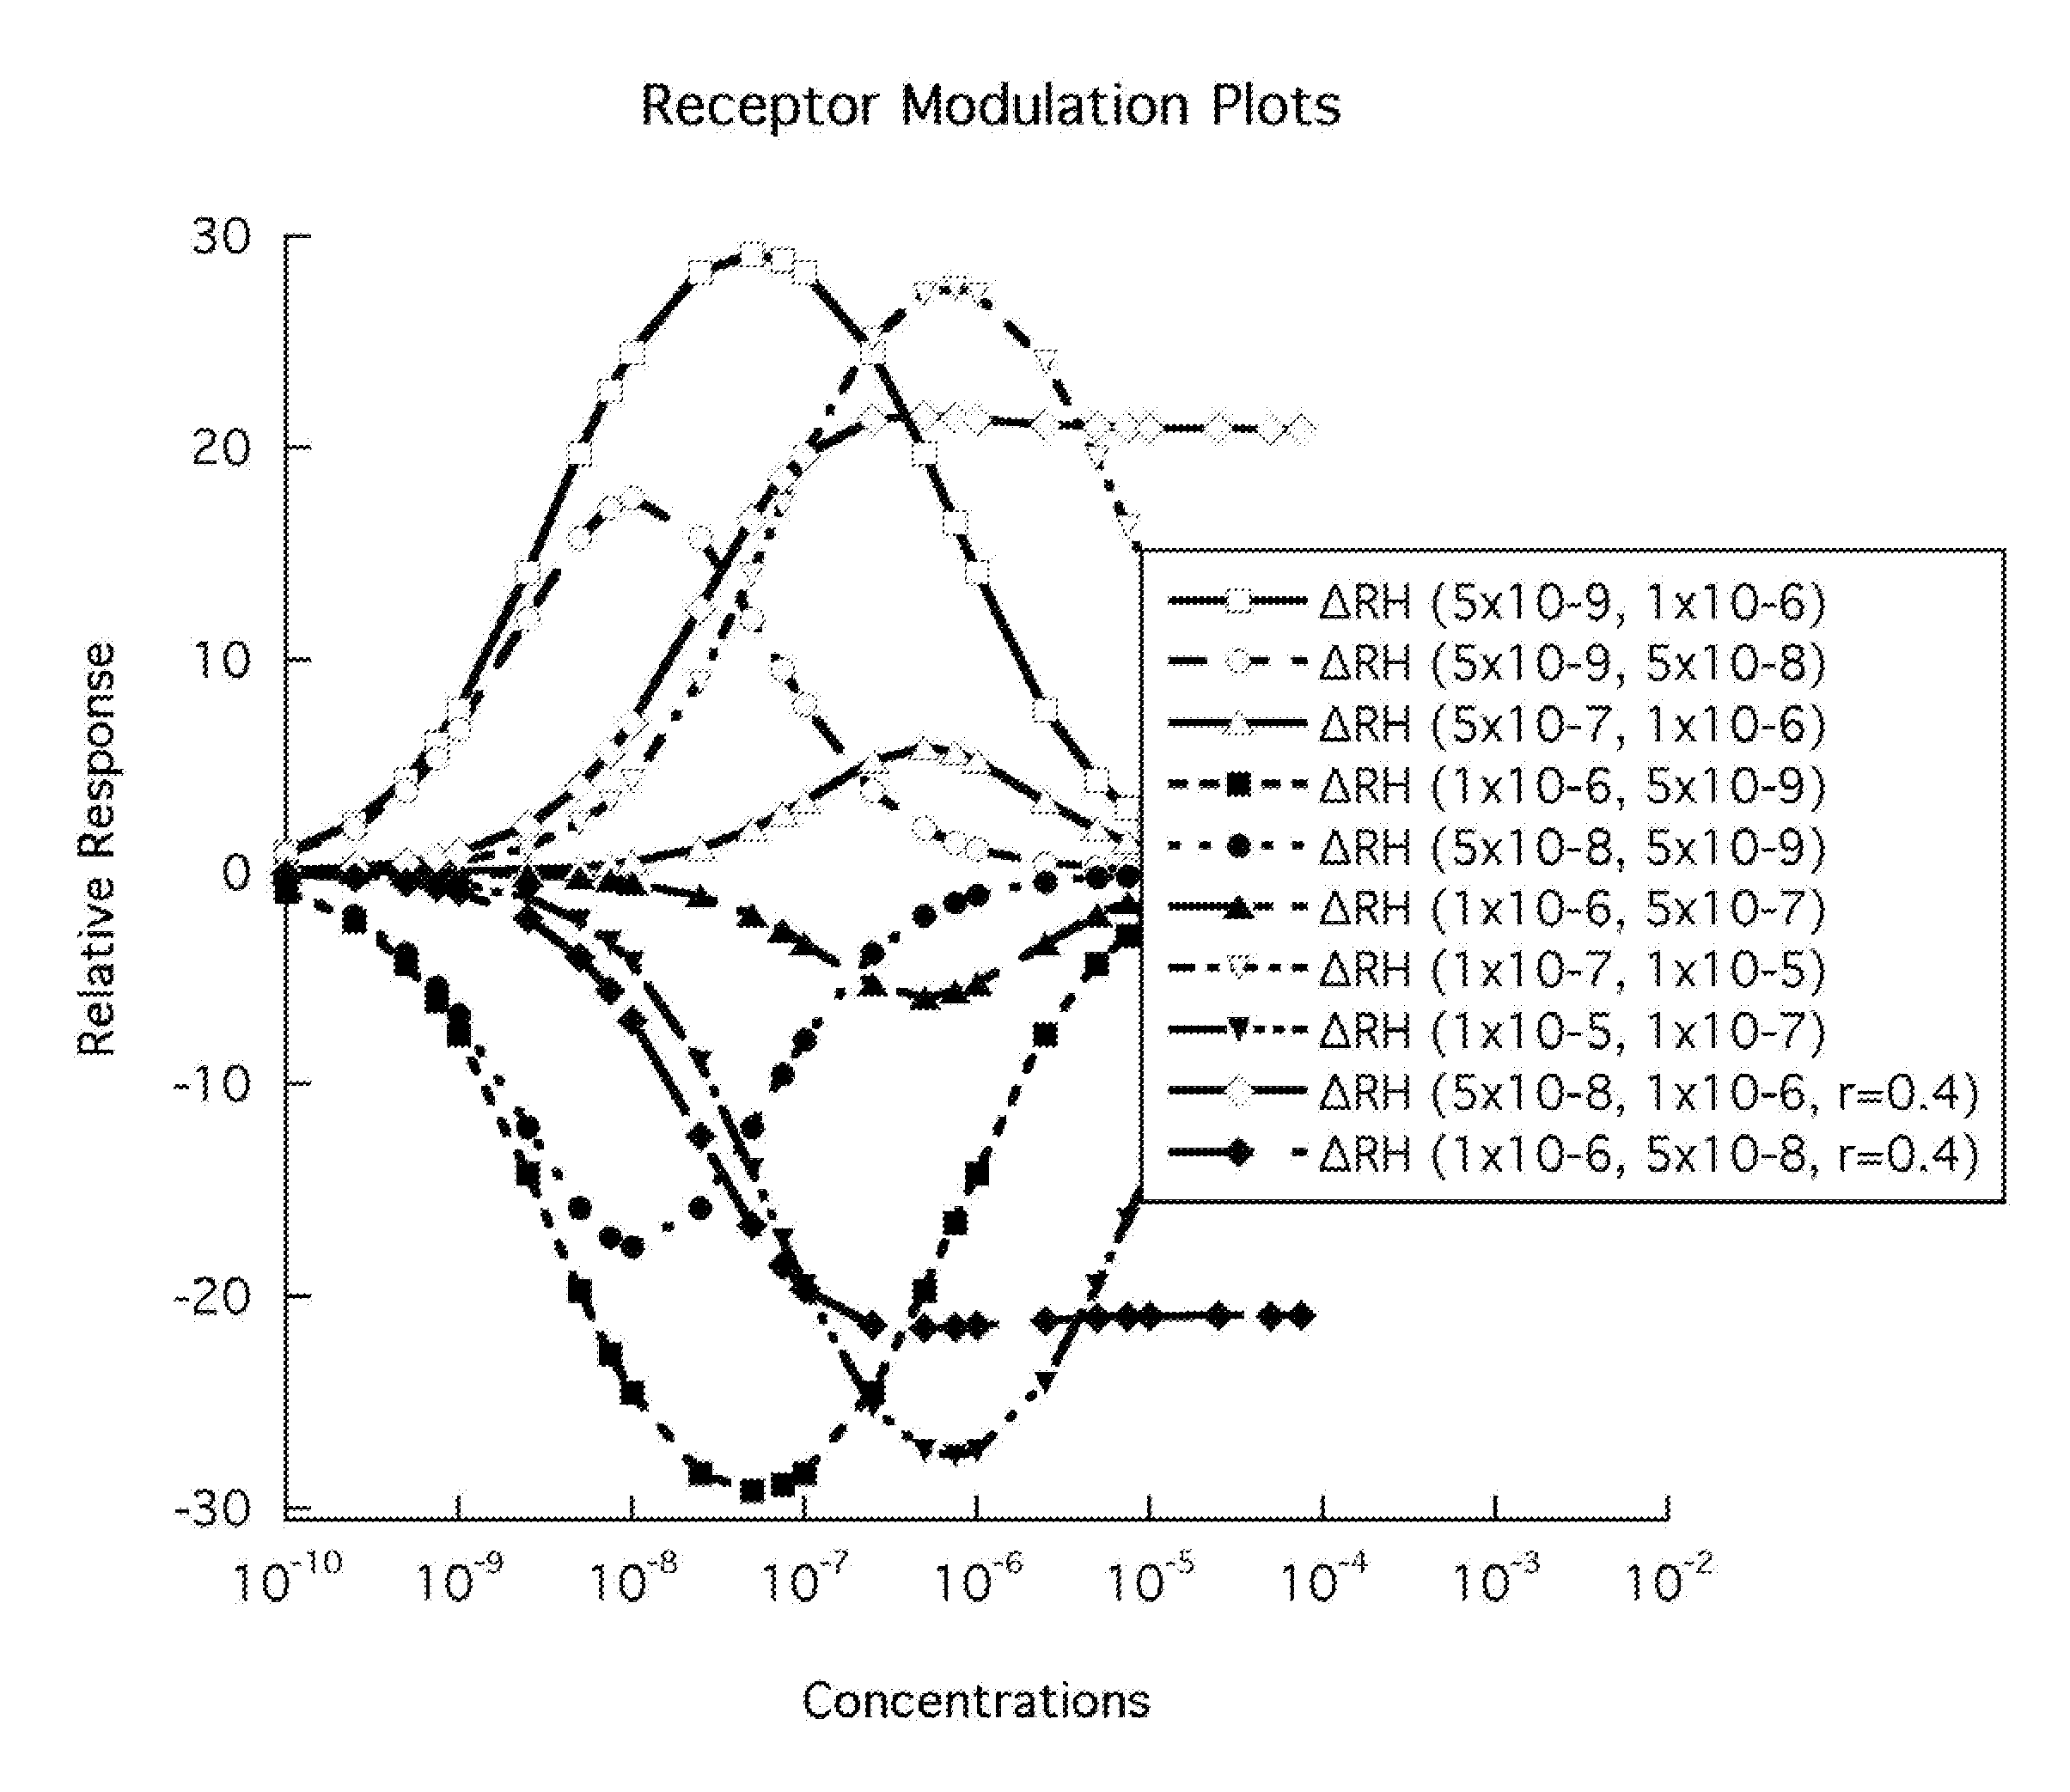 Method For Determining Drug-Molecular Combinations That Modulate And Enhance The Therapeutic Safety And Efficacy Of Biological Or Pharmaceutical Drugs